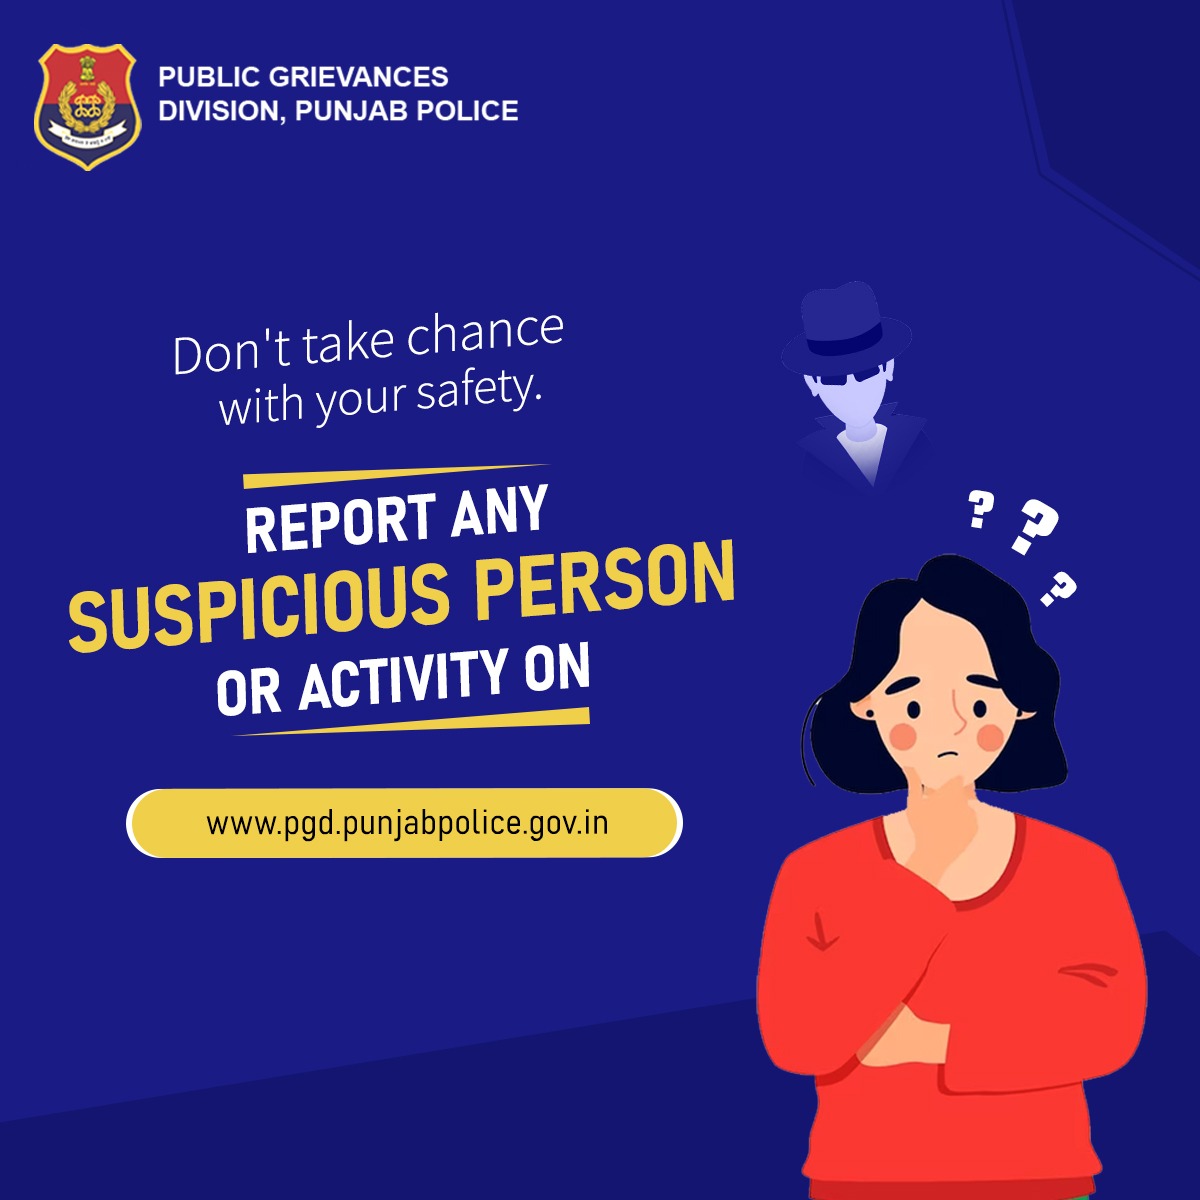 Report Suspicious Activity to the Police, File Your Complaint Hassle-free on Our Website for a Secure Community.
.
.
.
#reportsuspiciousactivity #safetyfirst #onlinecomplaintfiling #filecomplaints #pgdpunjabpolice #pgd #onlinesupport #onlinecomplaints
pgd.punjabpolice.gov.in